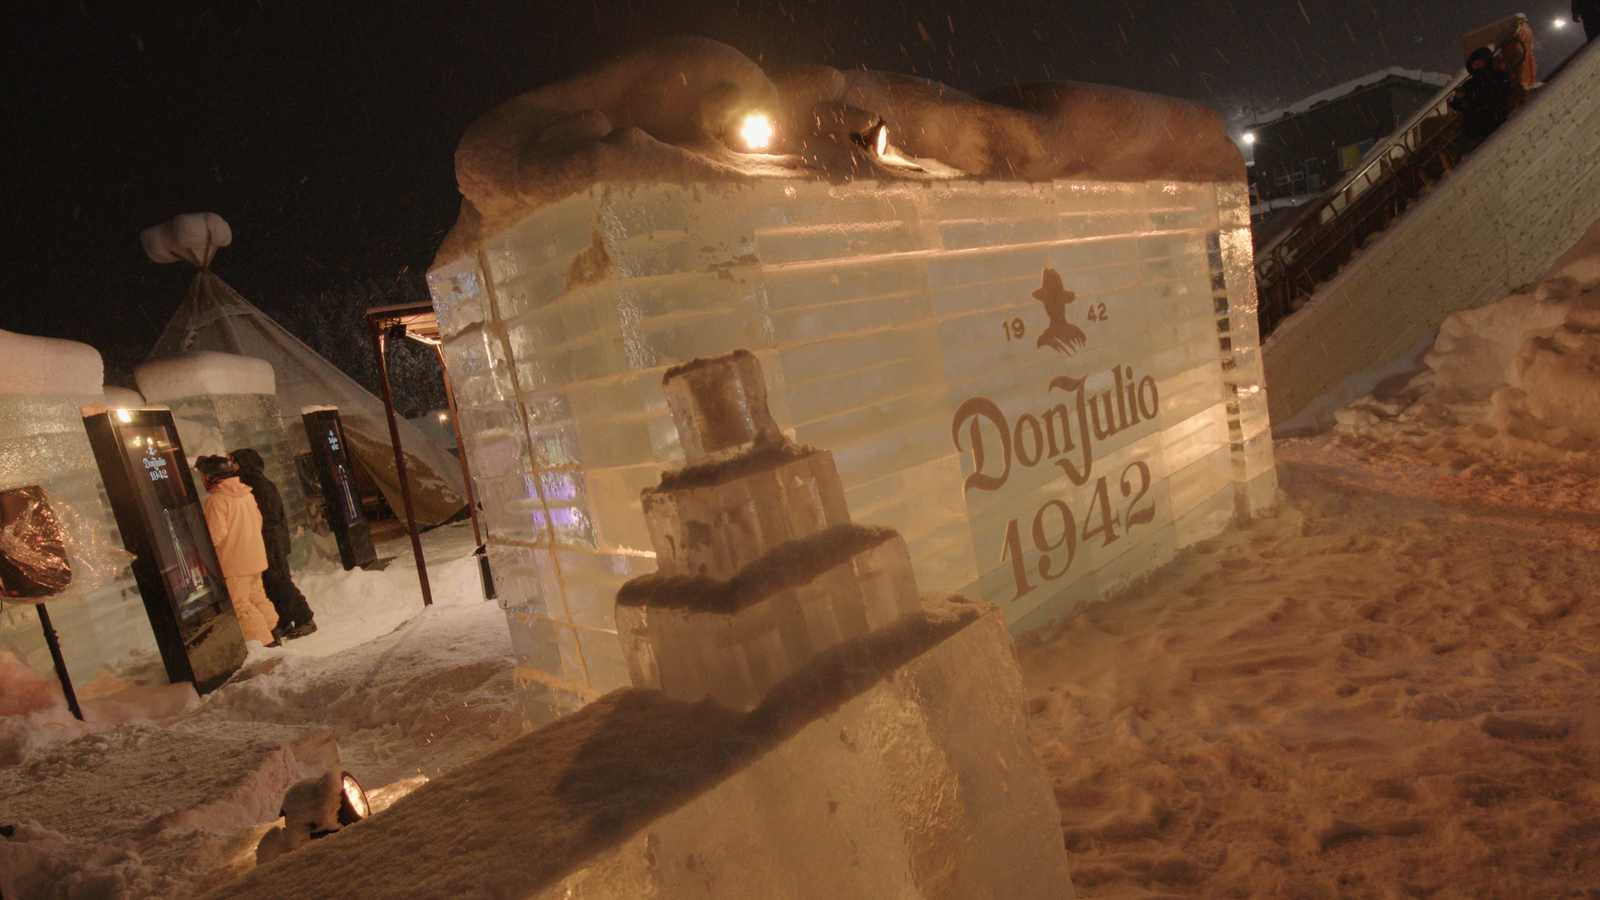 Ice Lounge by Don Julio 1942